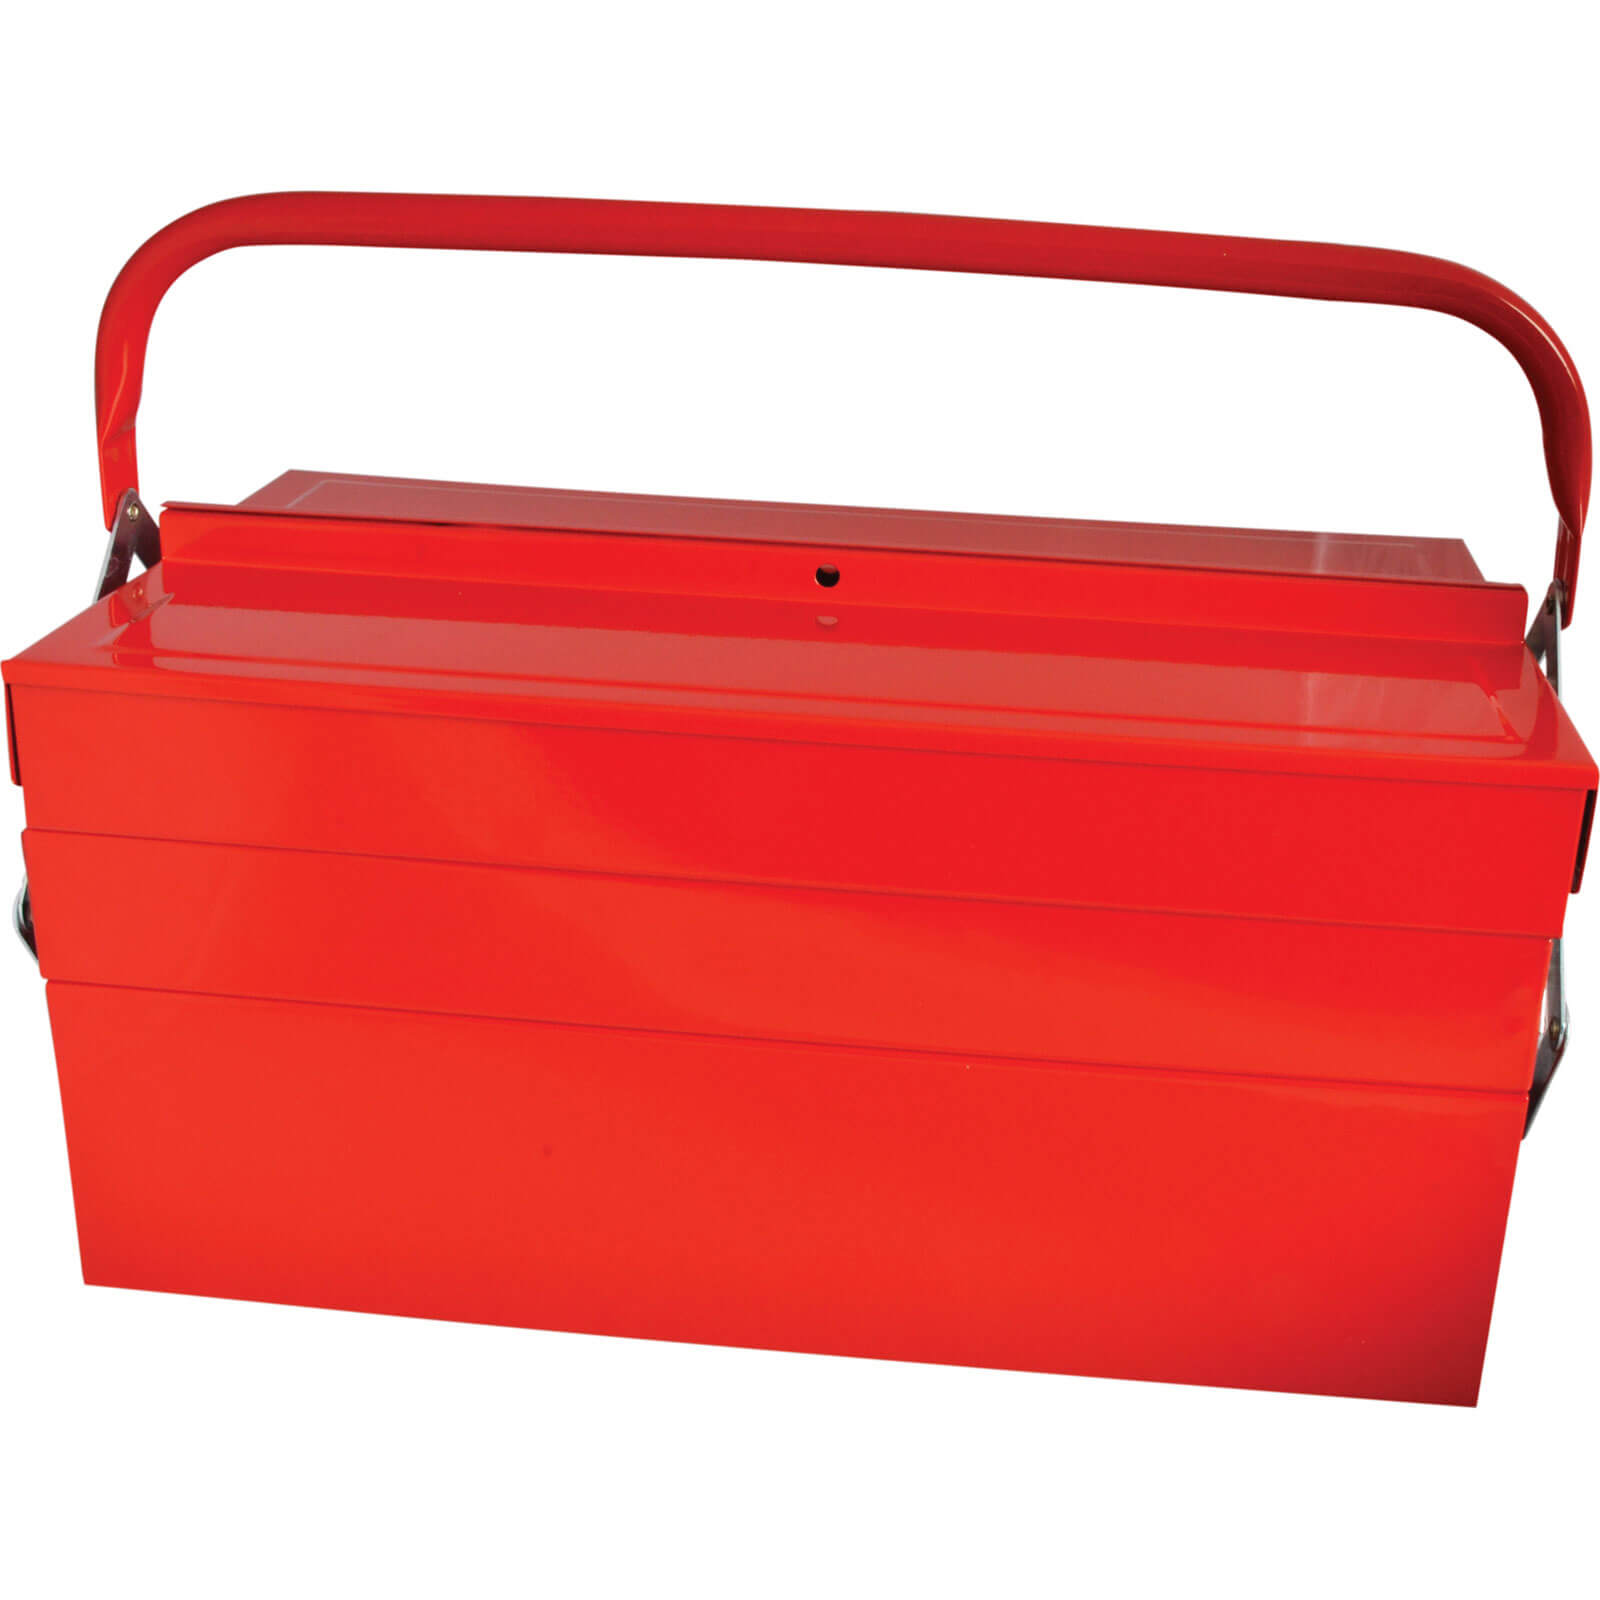 Image of Faithfull Metal Cantilever Tool Box 430mm